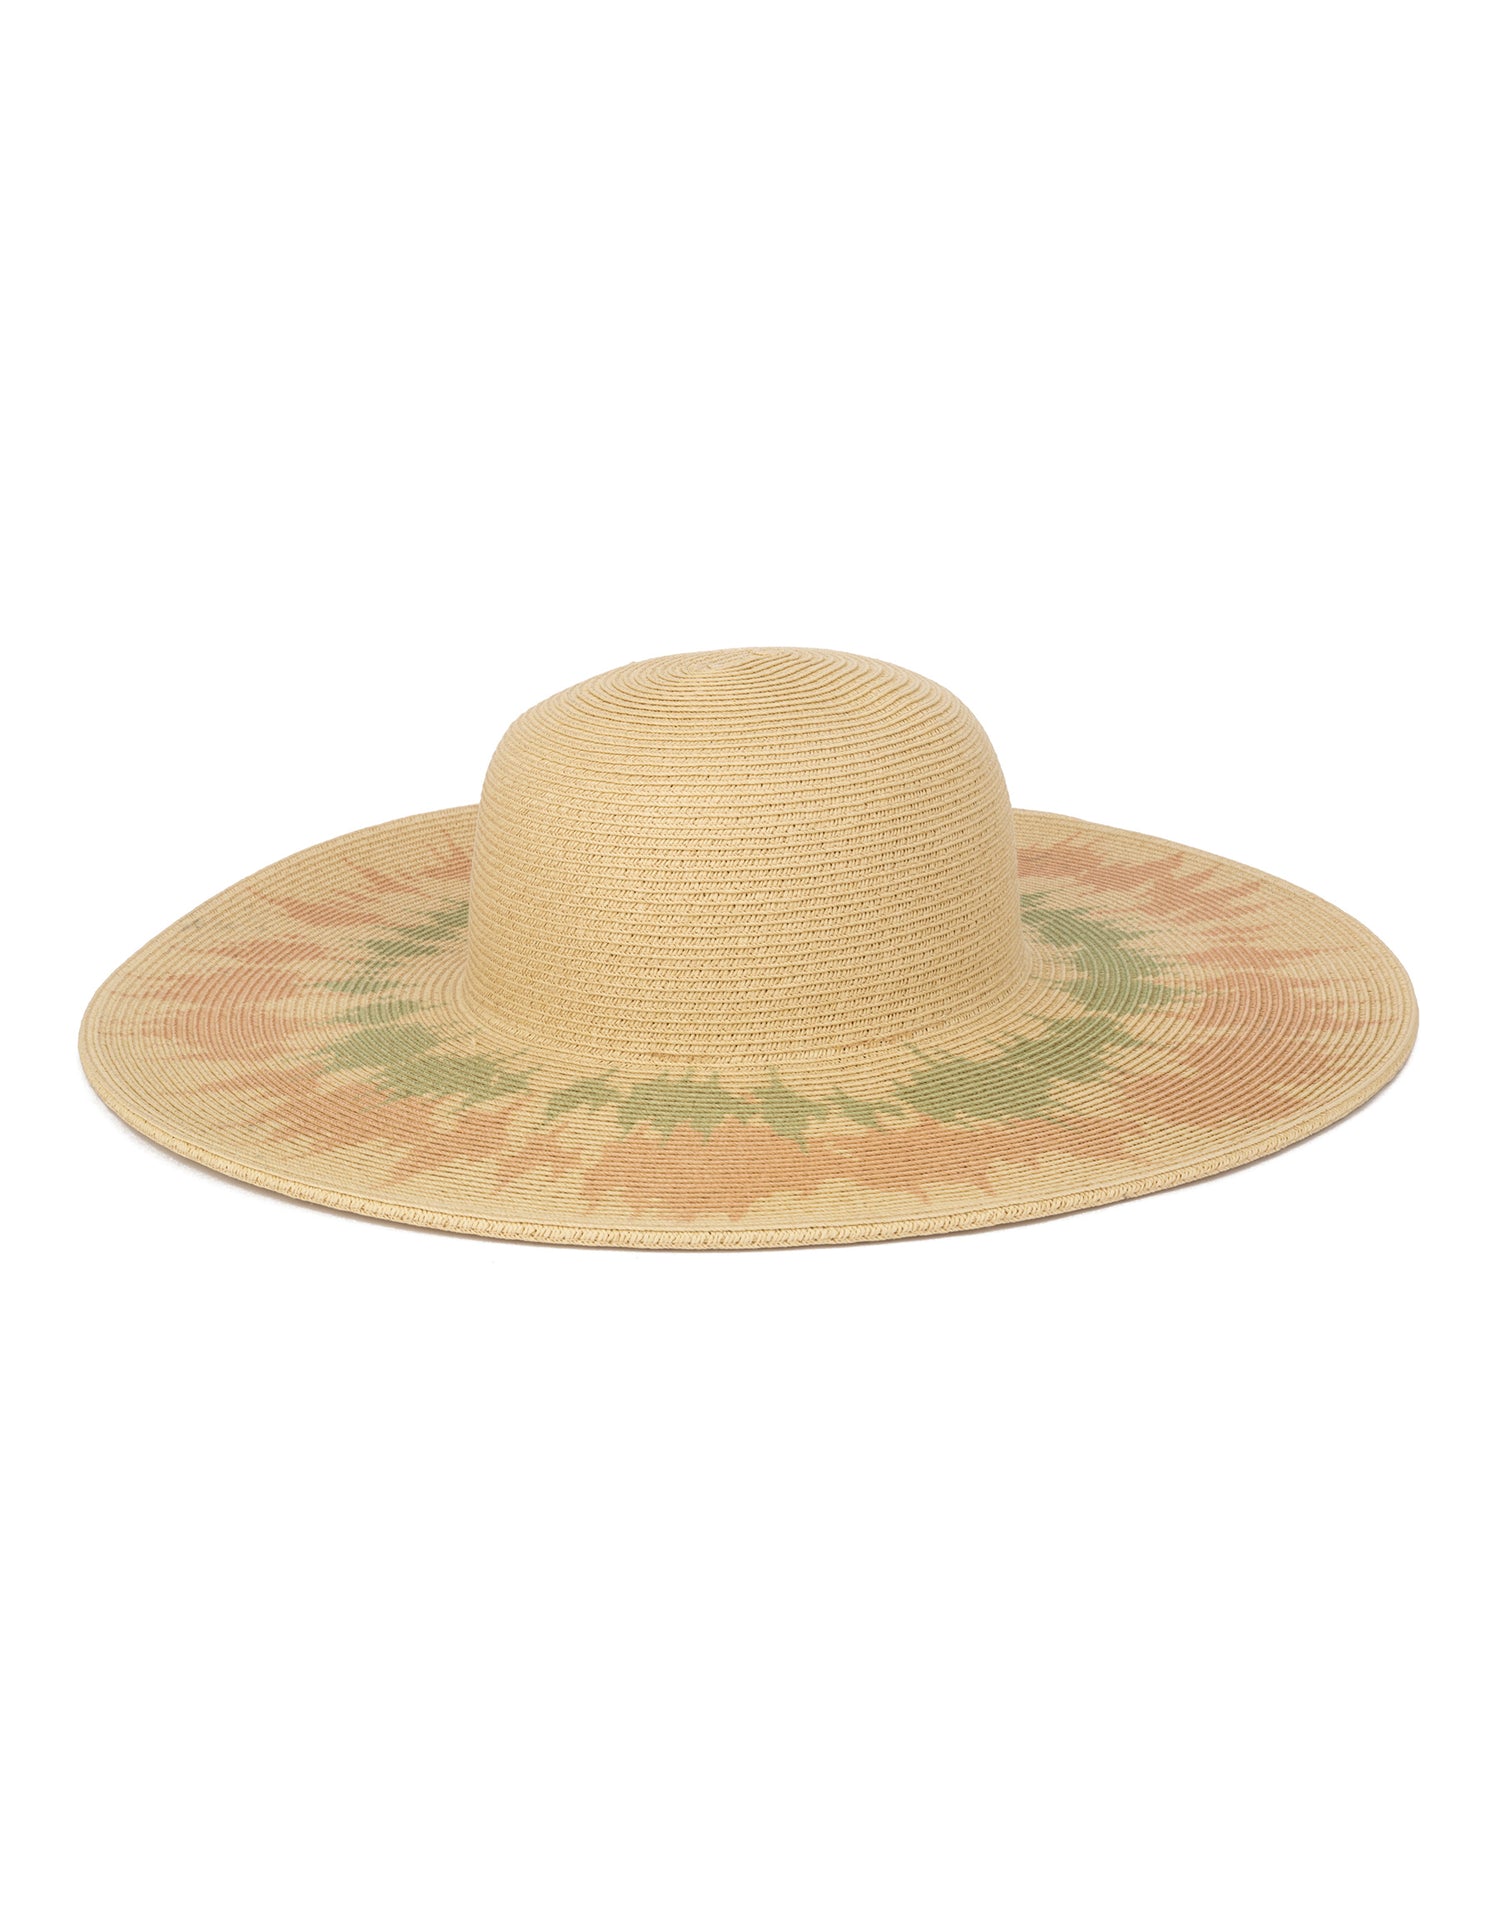 Care Free Splatter Sun Hat in Natural/Tie Dye by San Diego Hat Company - Product View